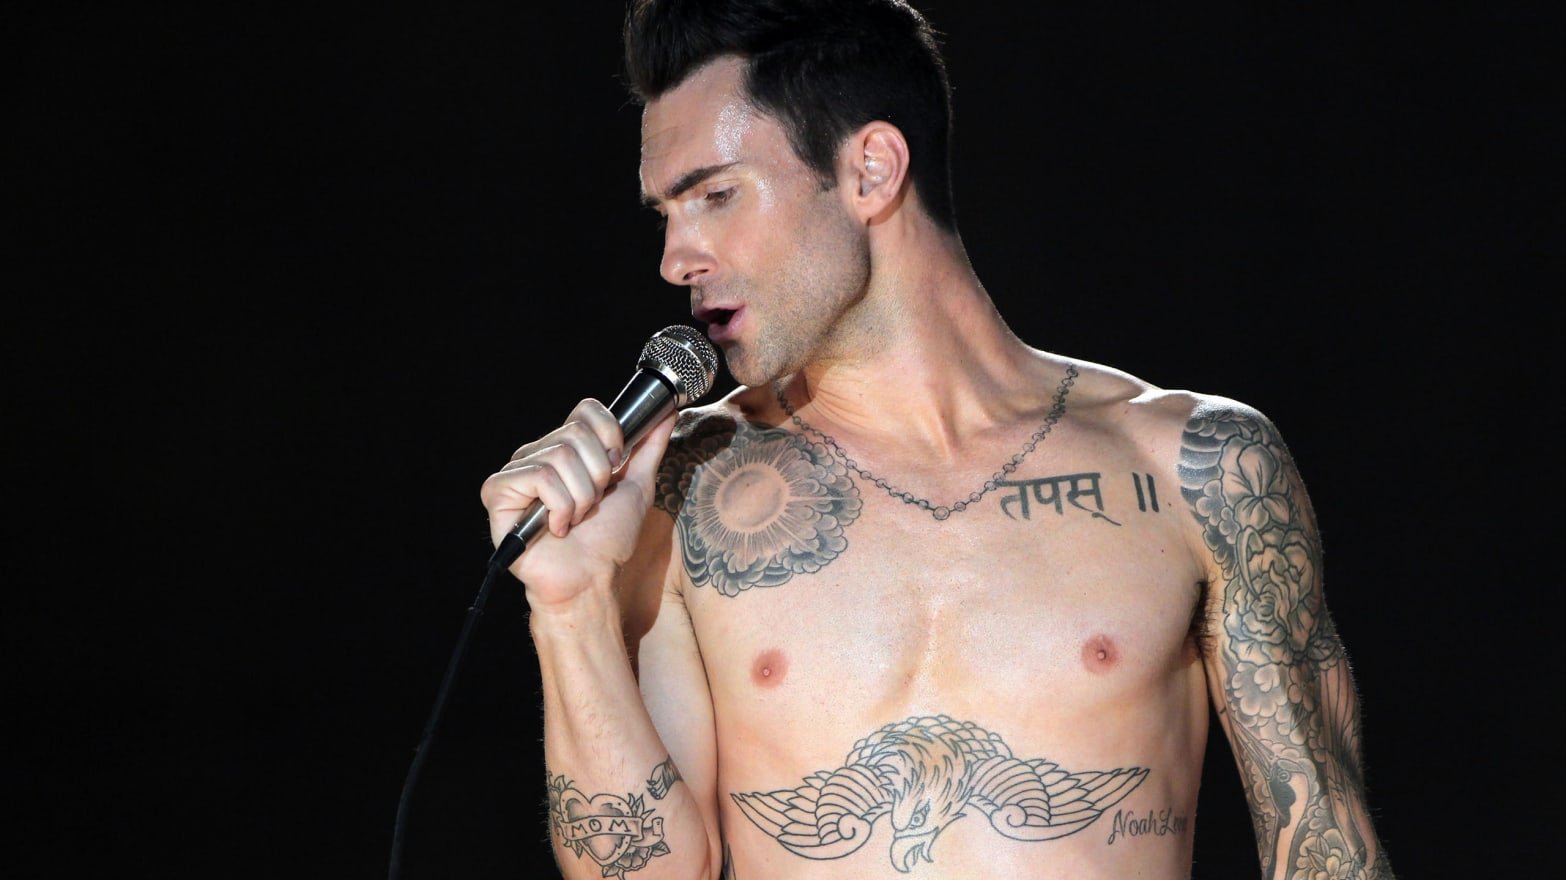 sexy celebs we don't think are hot - Adam Levine